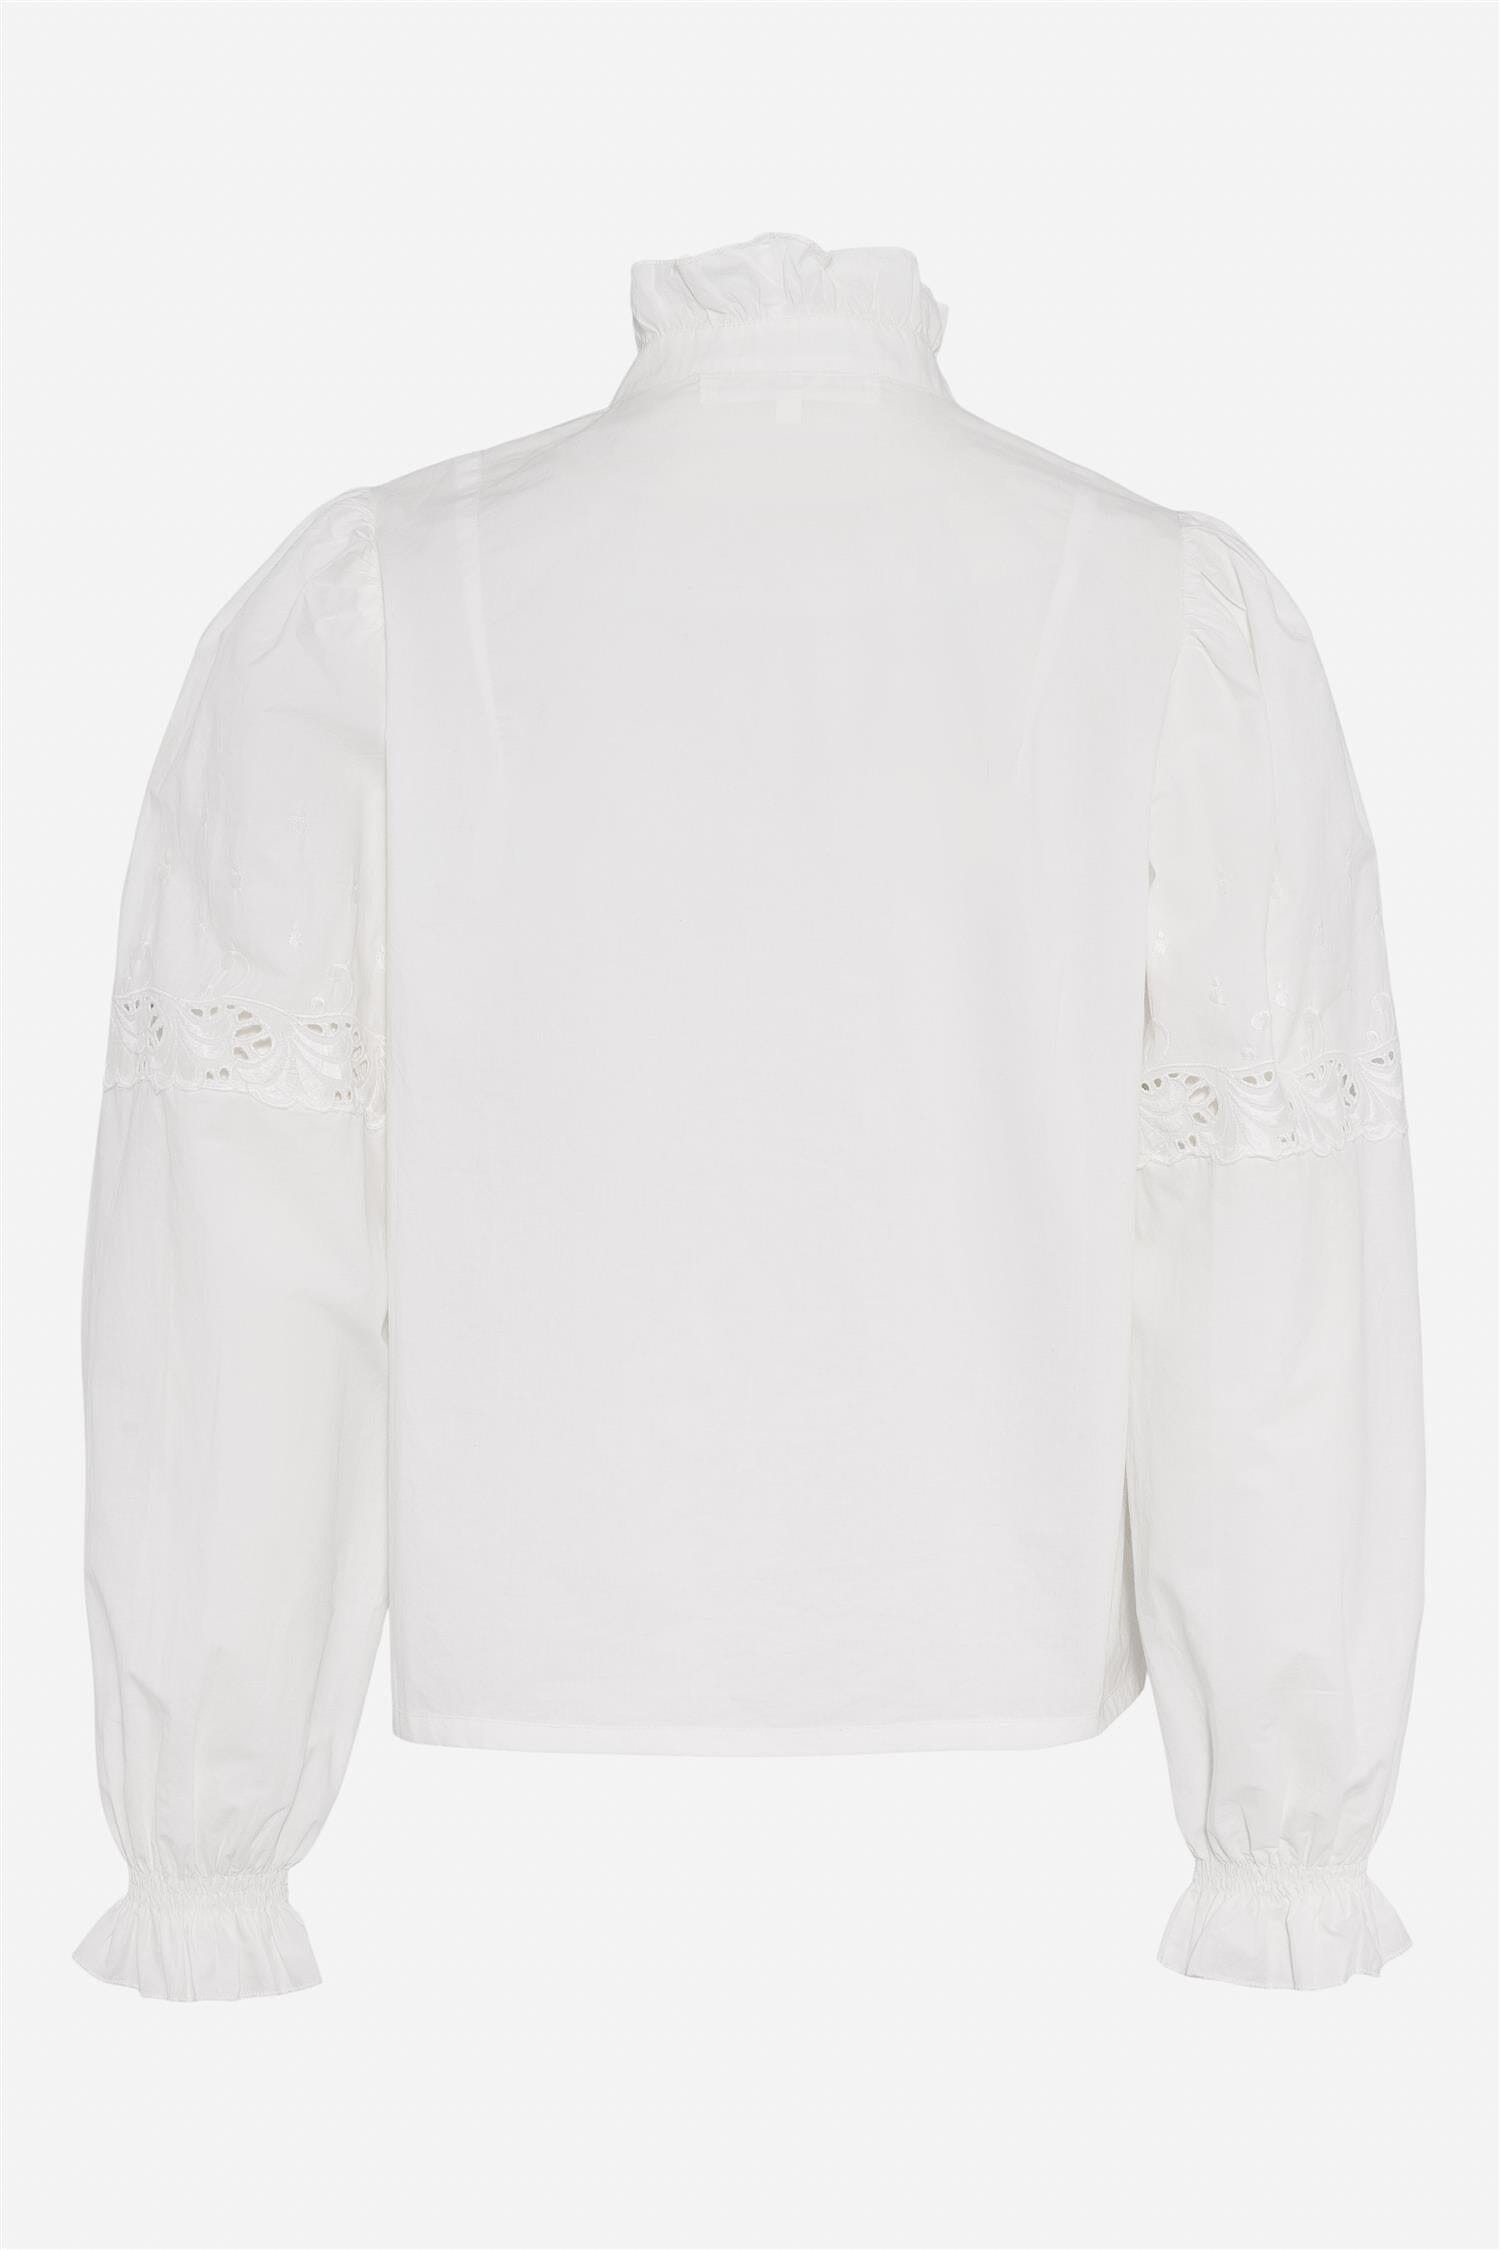 Pia Tjelta May White Bluse